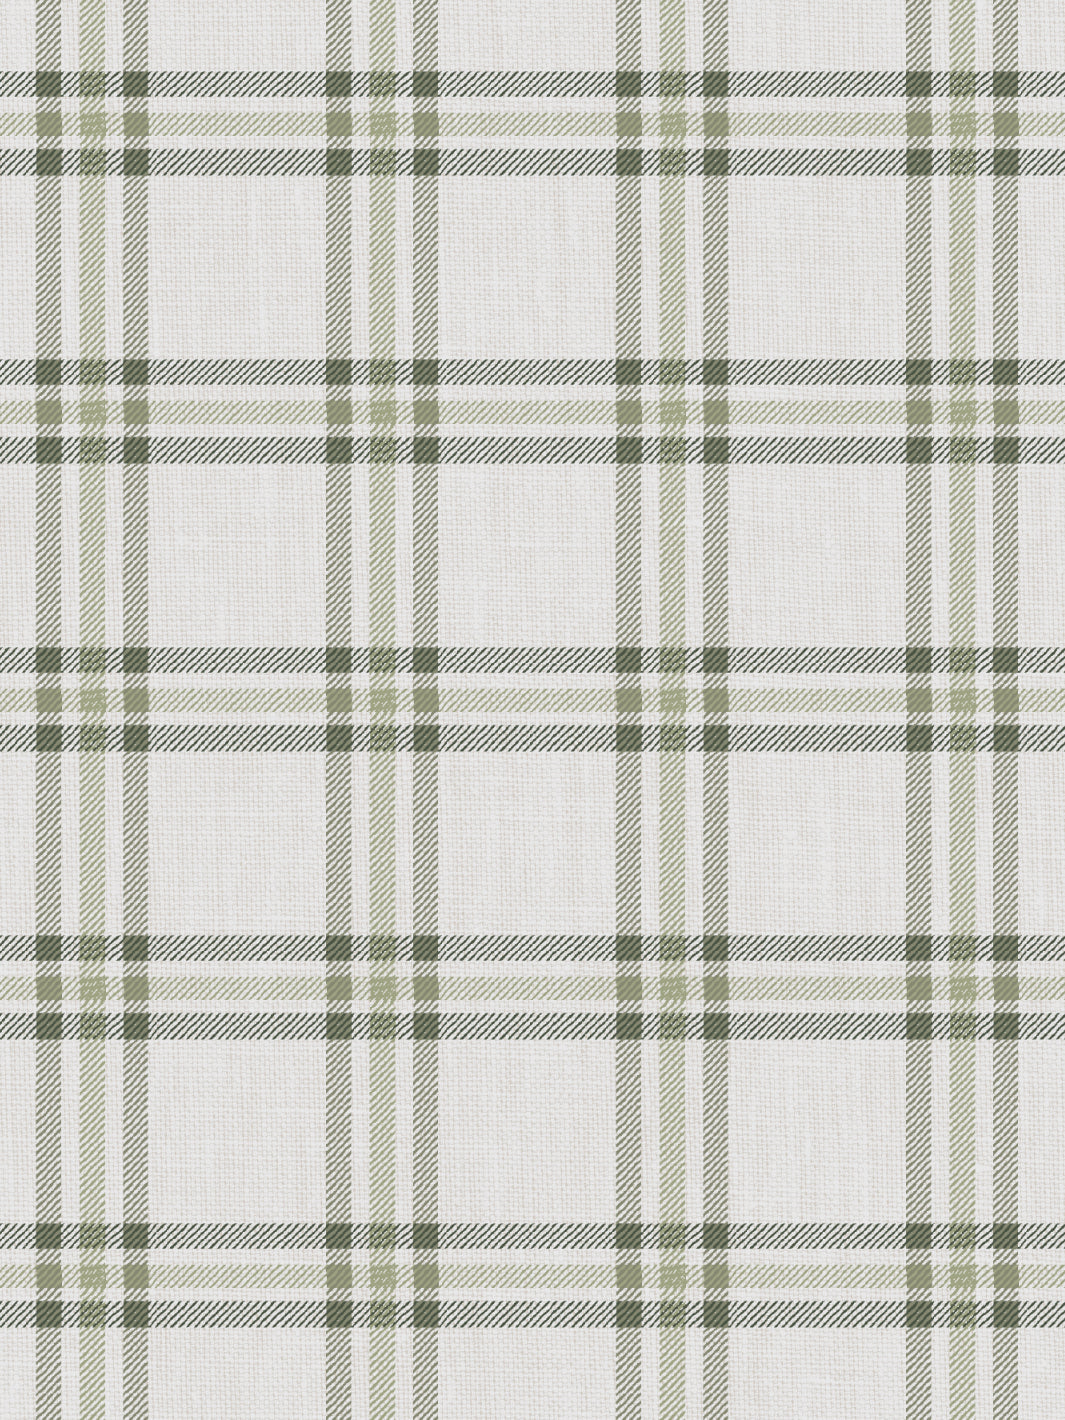 'Rogers Plaid' Wallpaper by Nathan Turner - Green